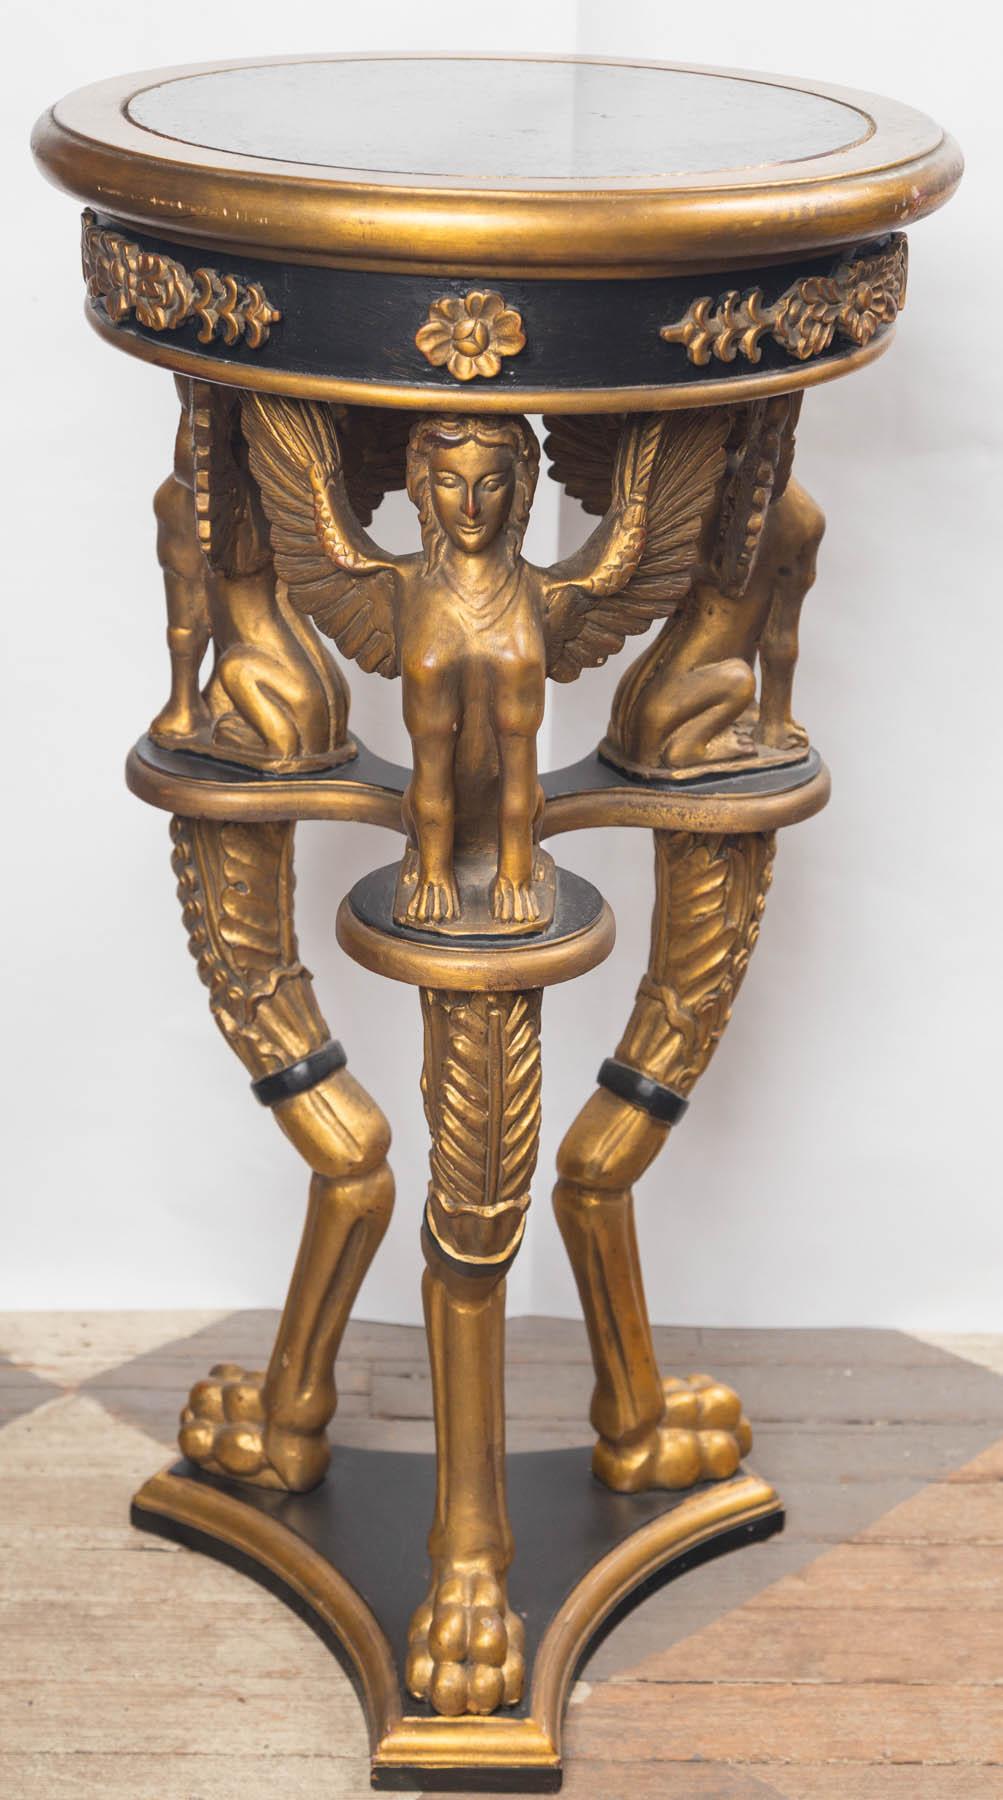 In the Empire style, black and gold surface. Black glass inset top with 15 inches of usable surface. Gold colored appliques around the edge of the top. Three winged female figures with animal legs and paws. Below are three carved incurving legs